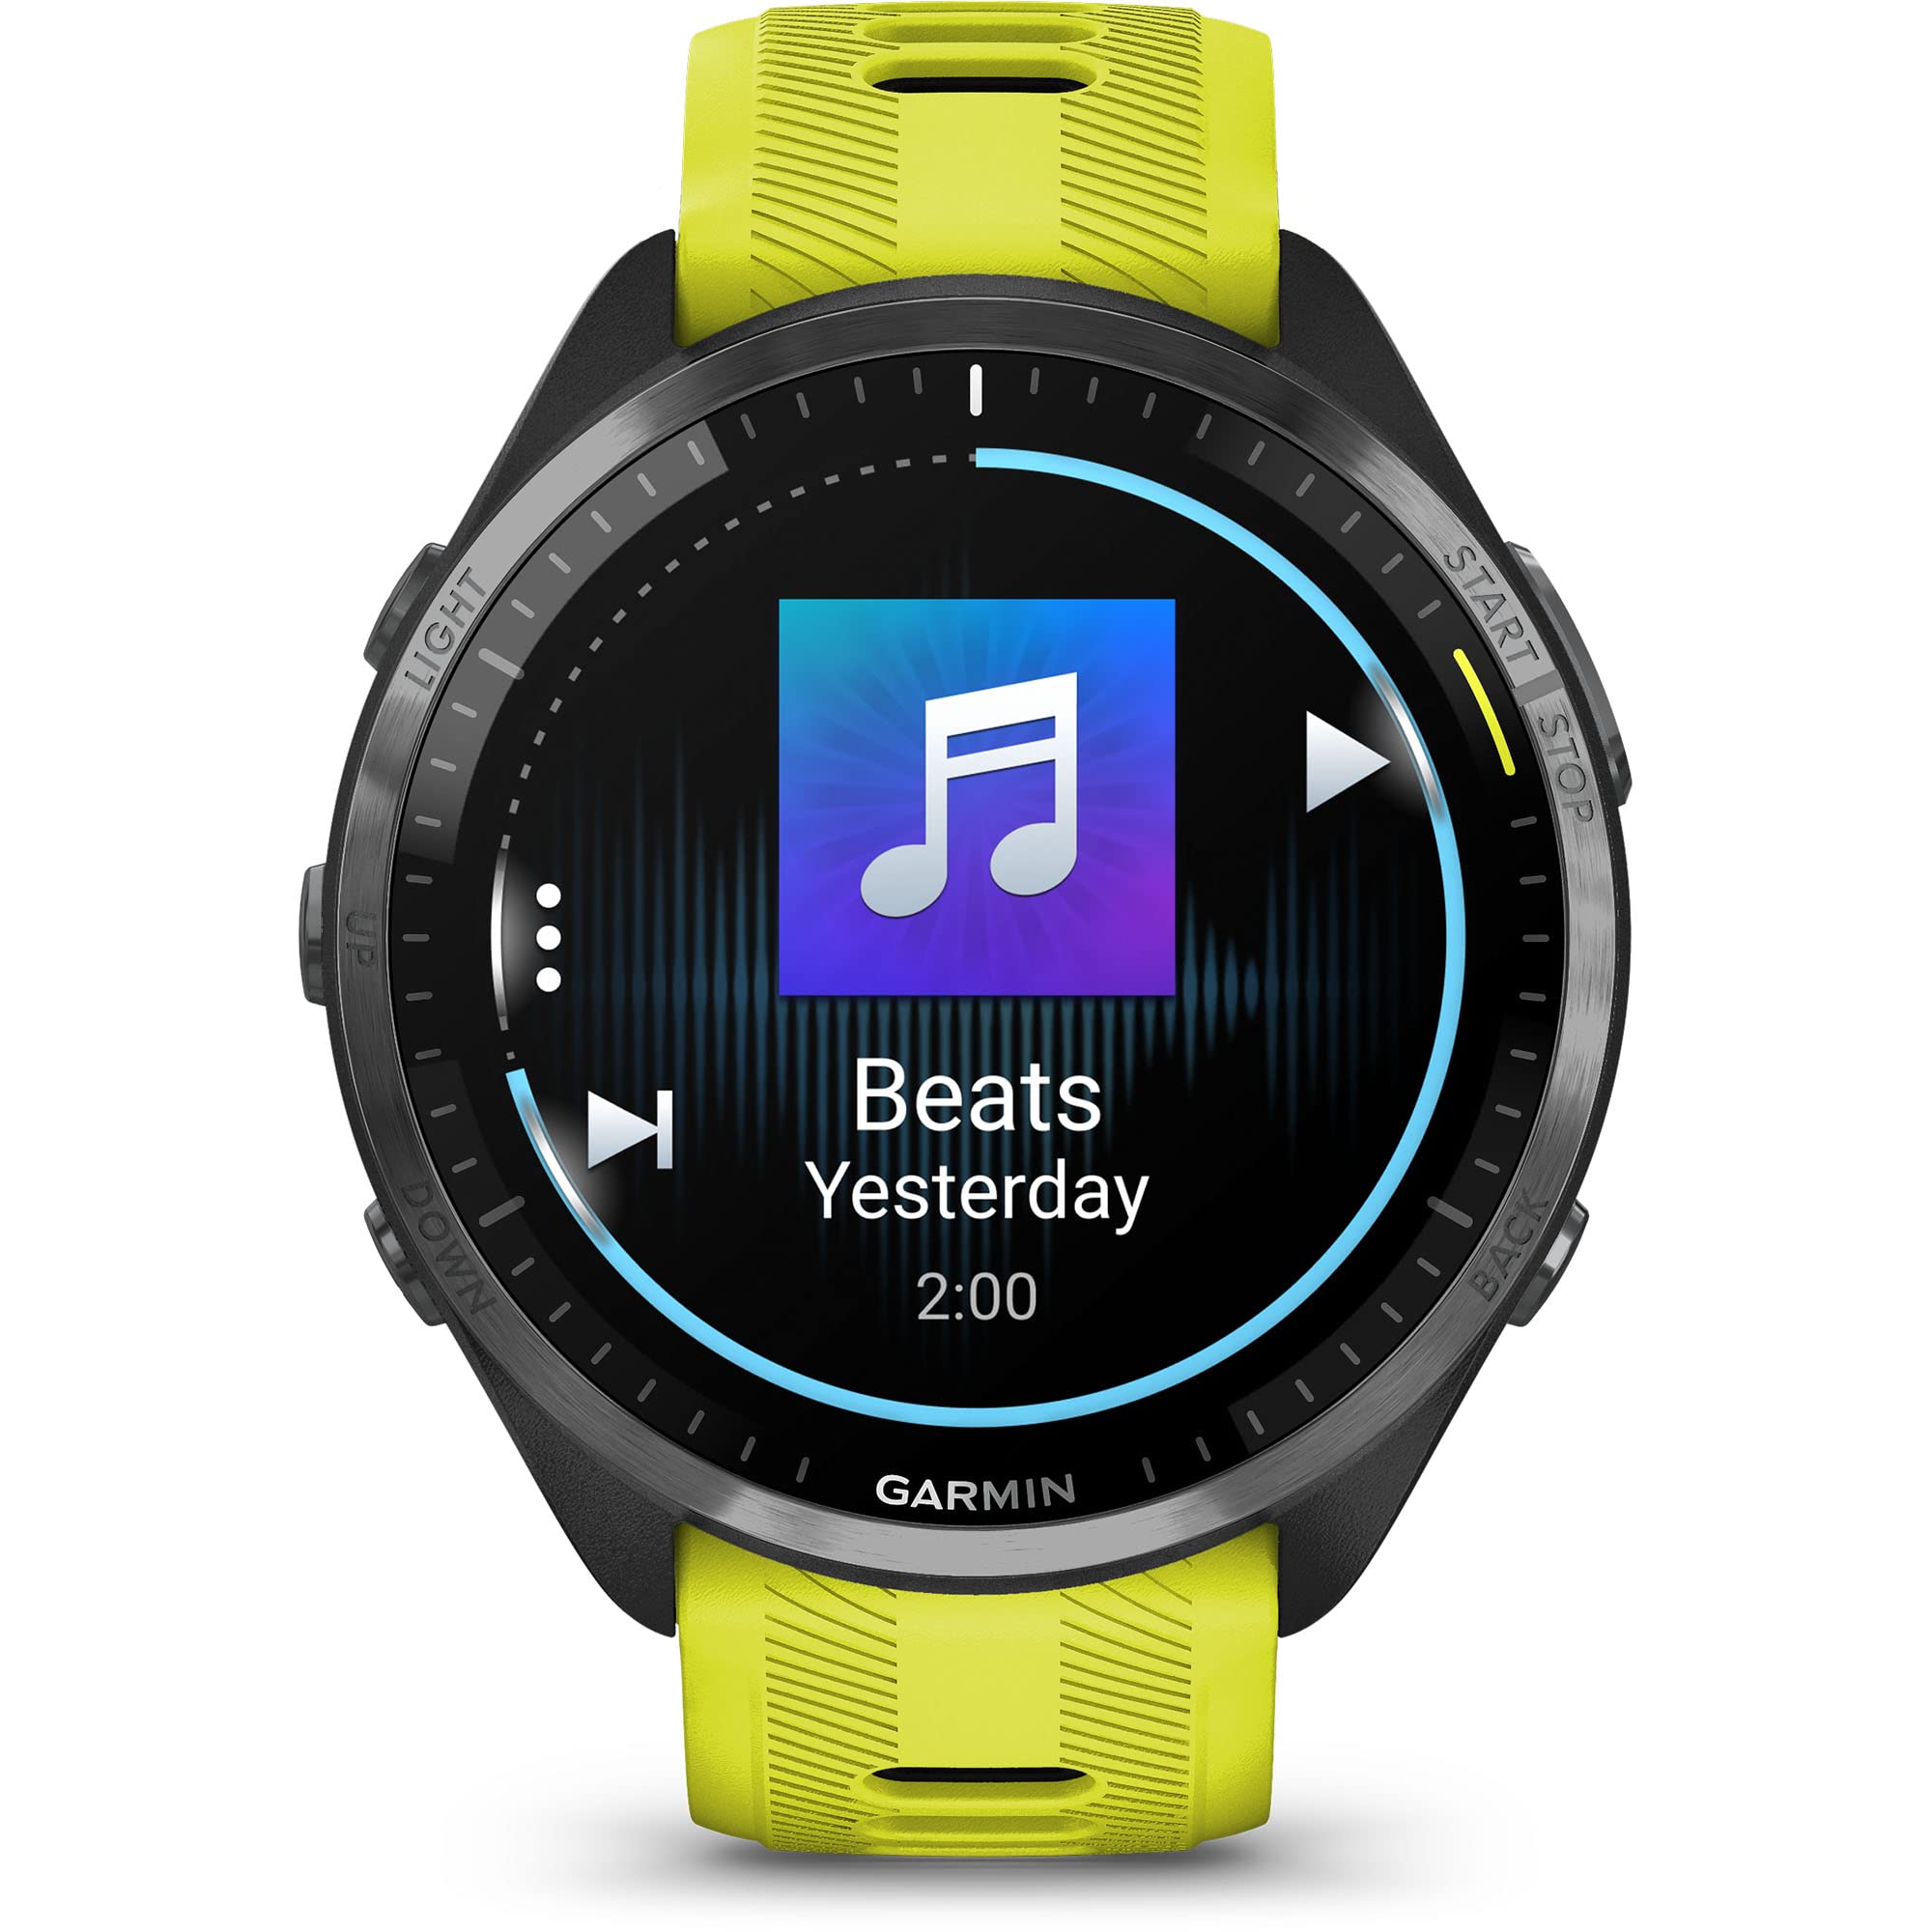 Garmin Forerunner® 965 Running Smartwatch, Colorful AMOLED Display, Training Metrics and Recovery Insights, Amp Yellow and Black - image 5 of 5